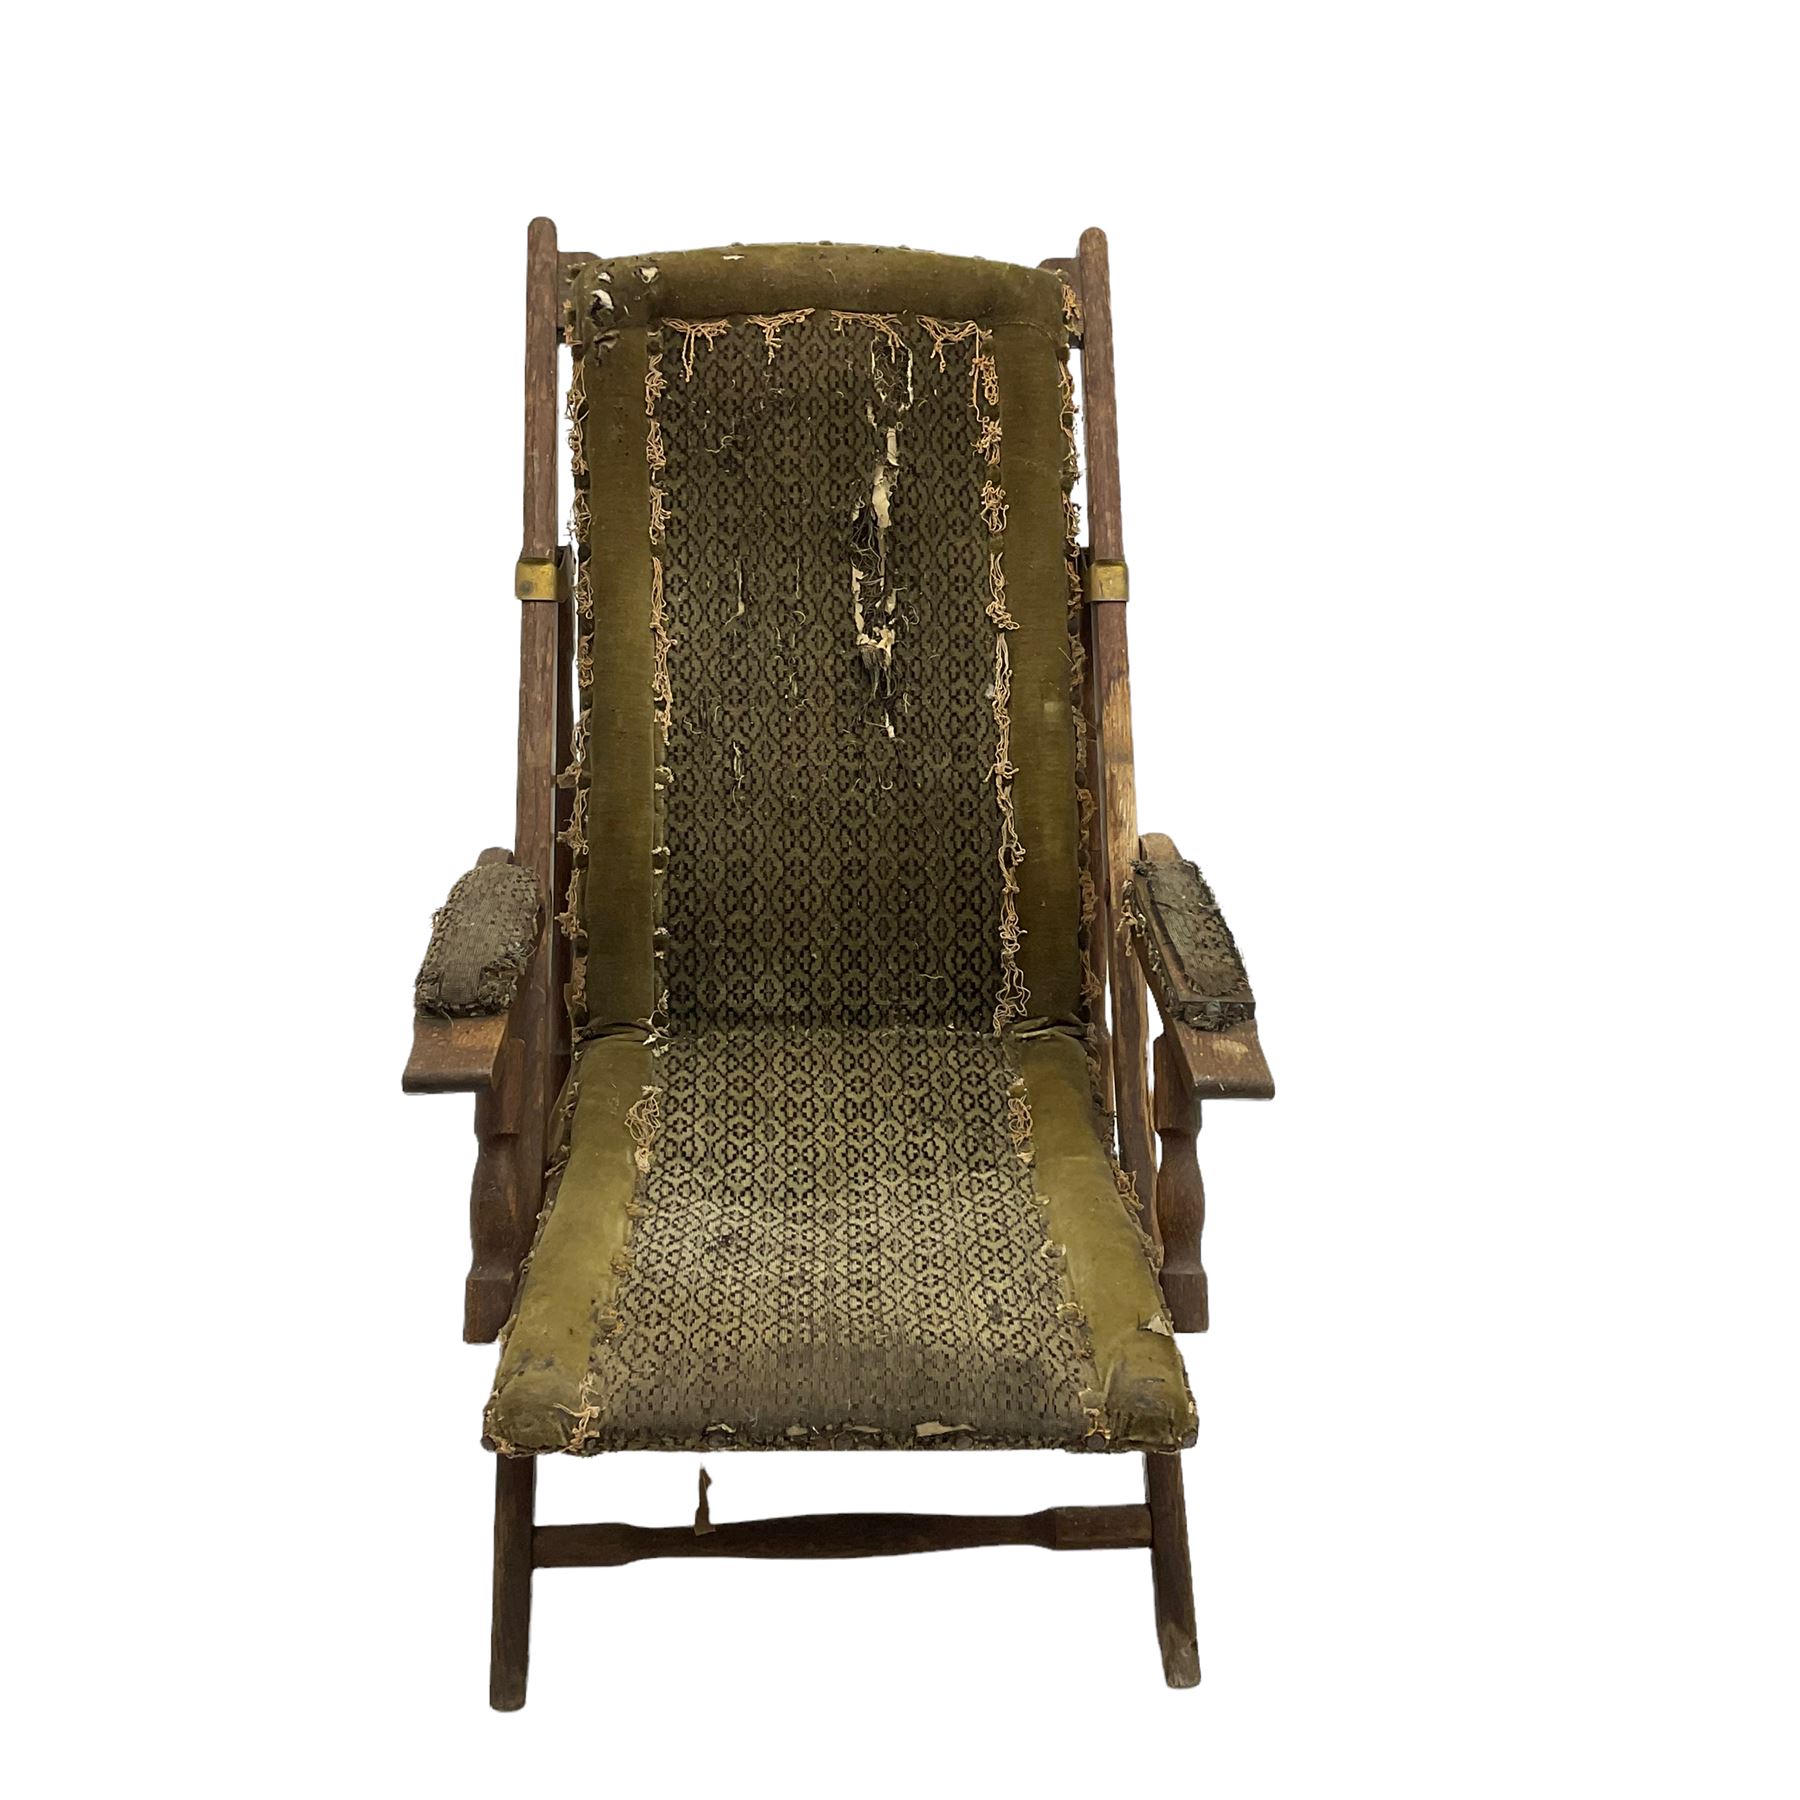 19th century oak campaign steamer or garden chair - Image 4 of 5